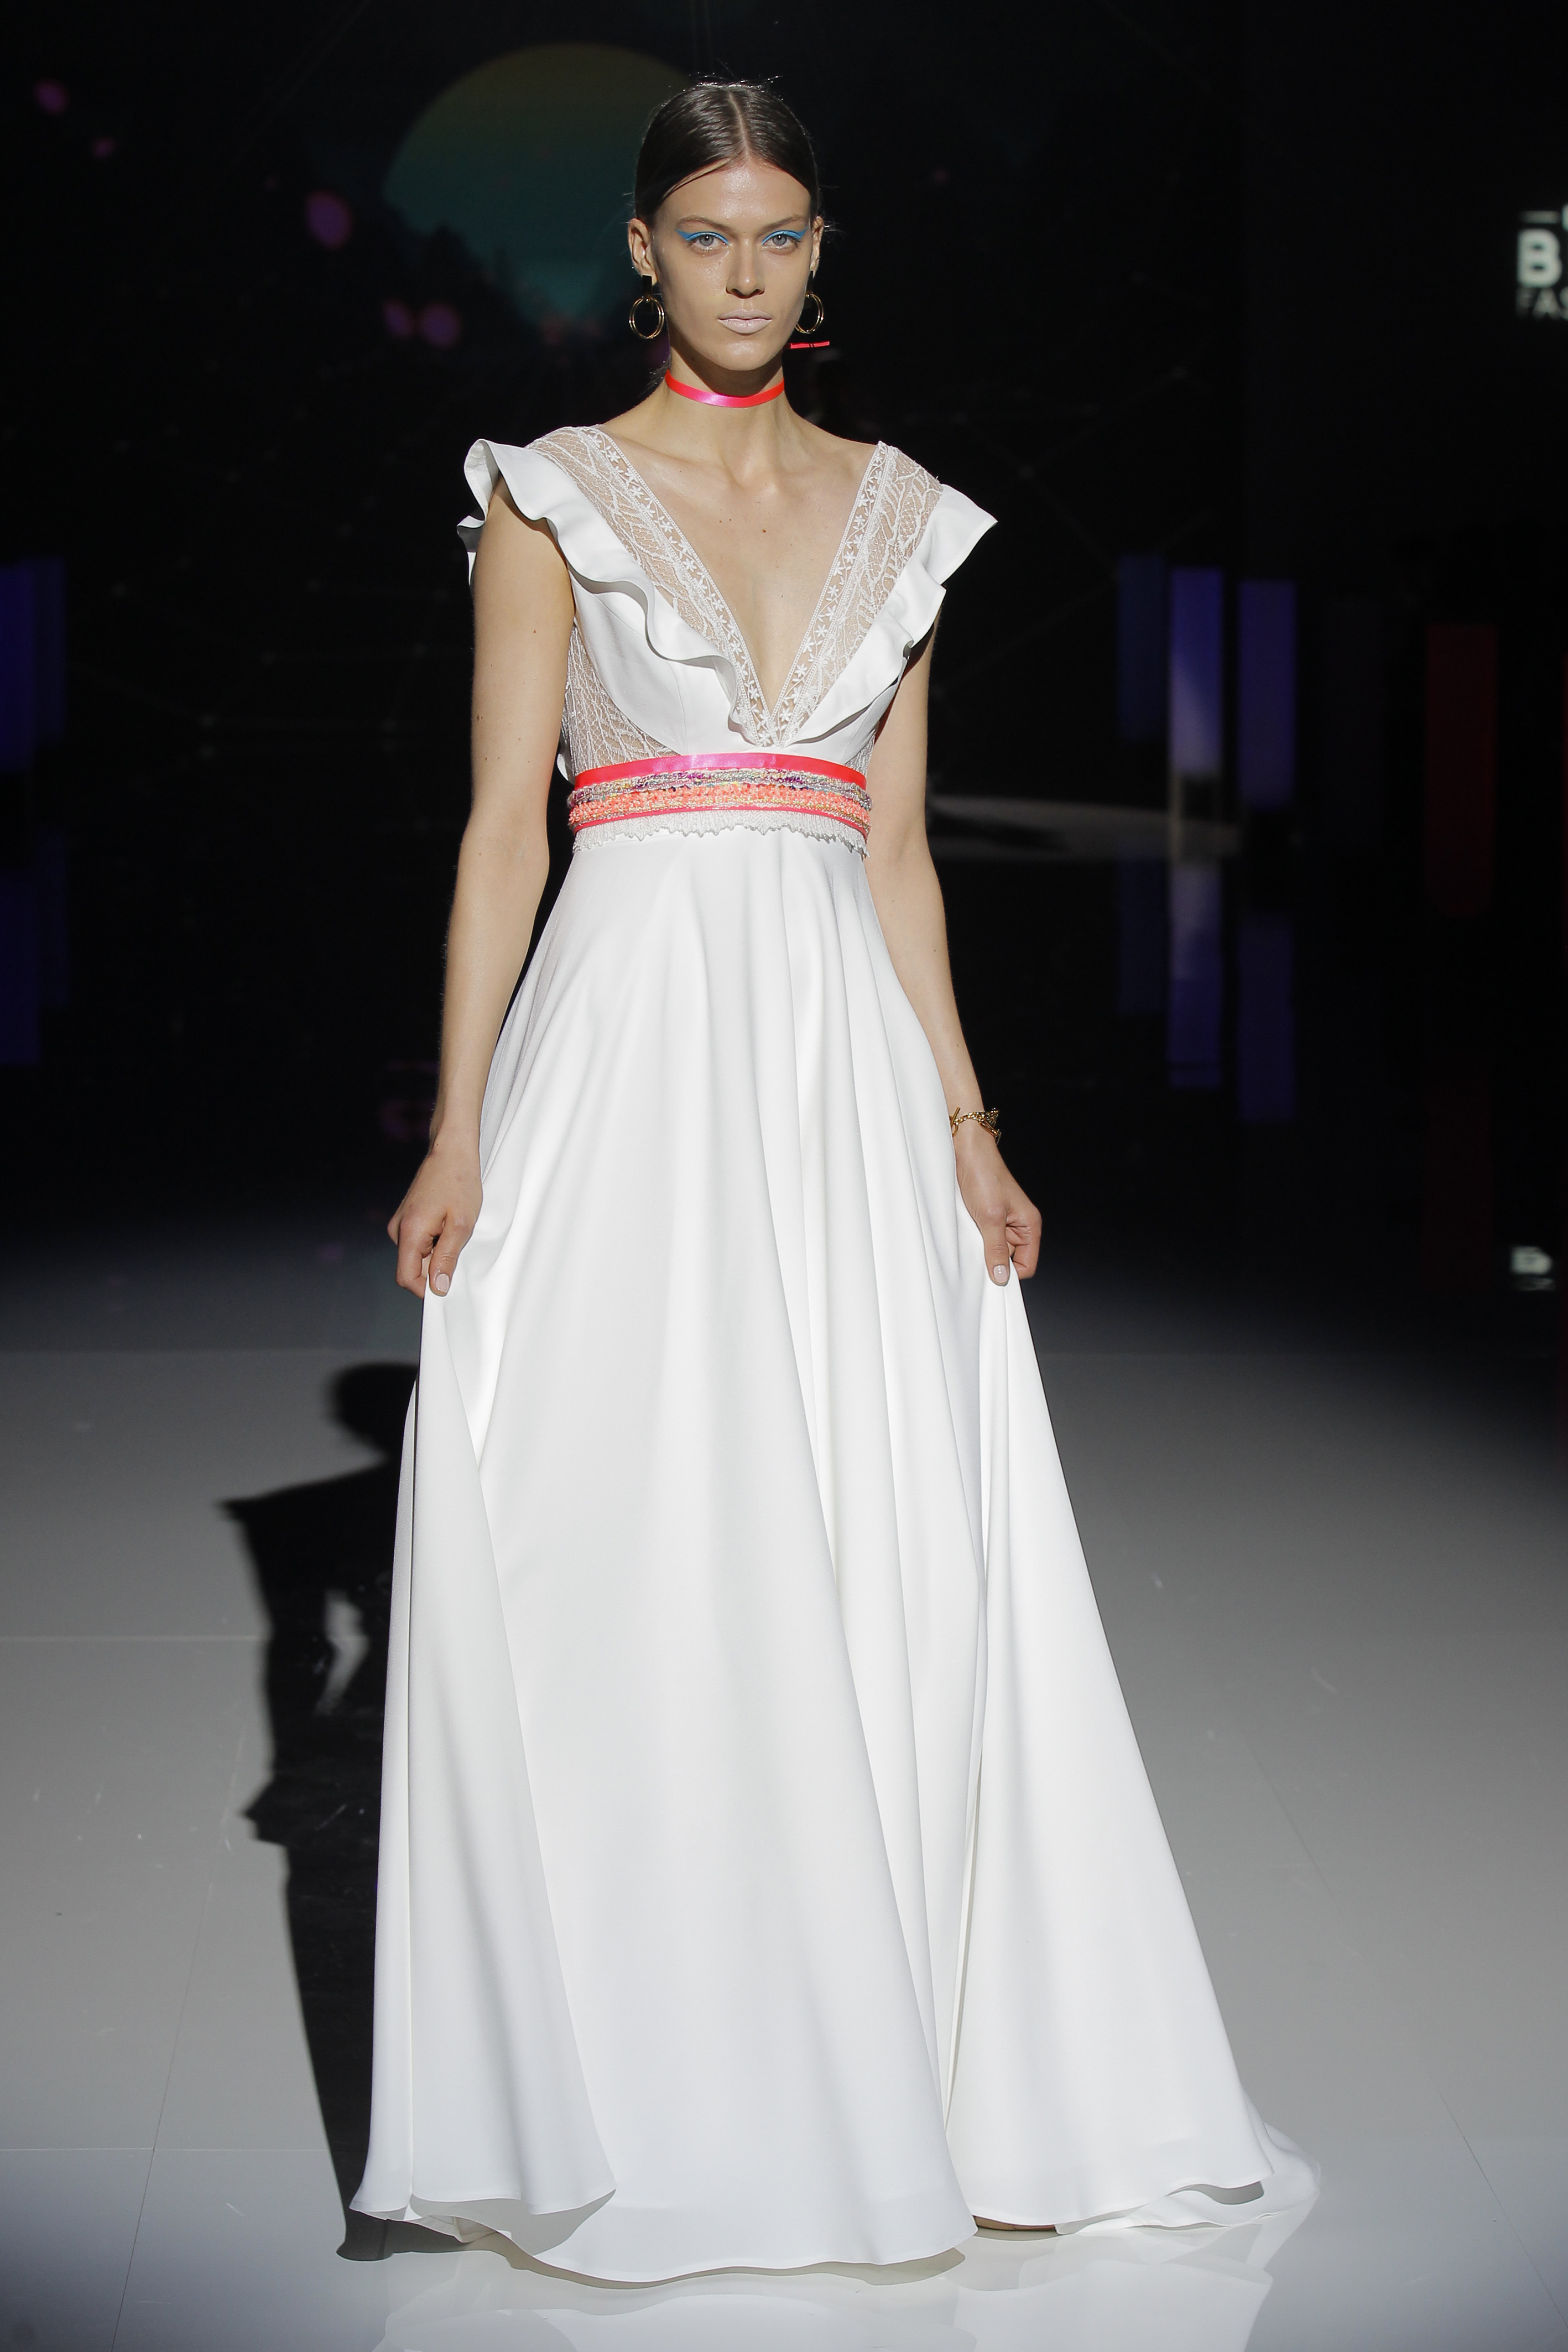 Créditos: Marylise by Rembo Styling, Barcelona Bridal Fashion Week